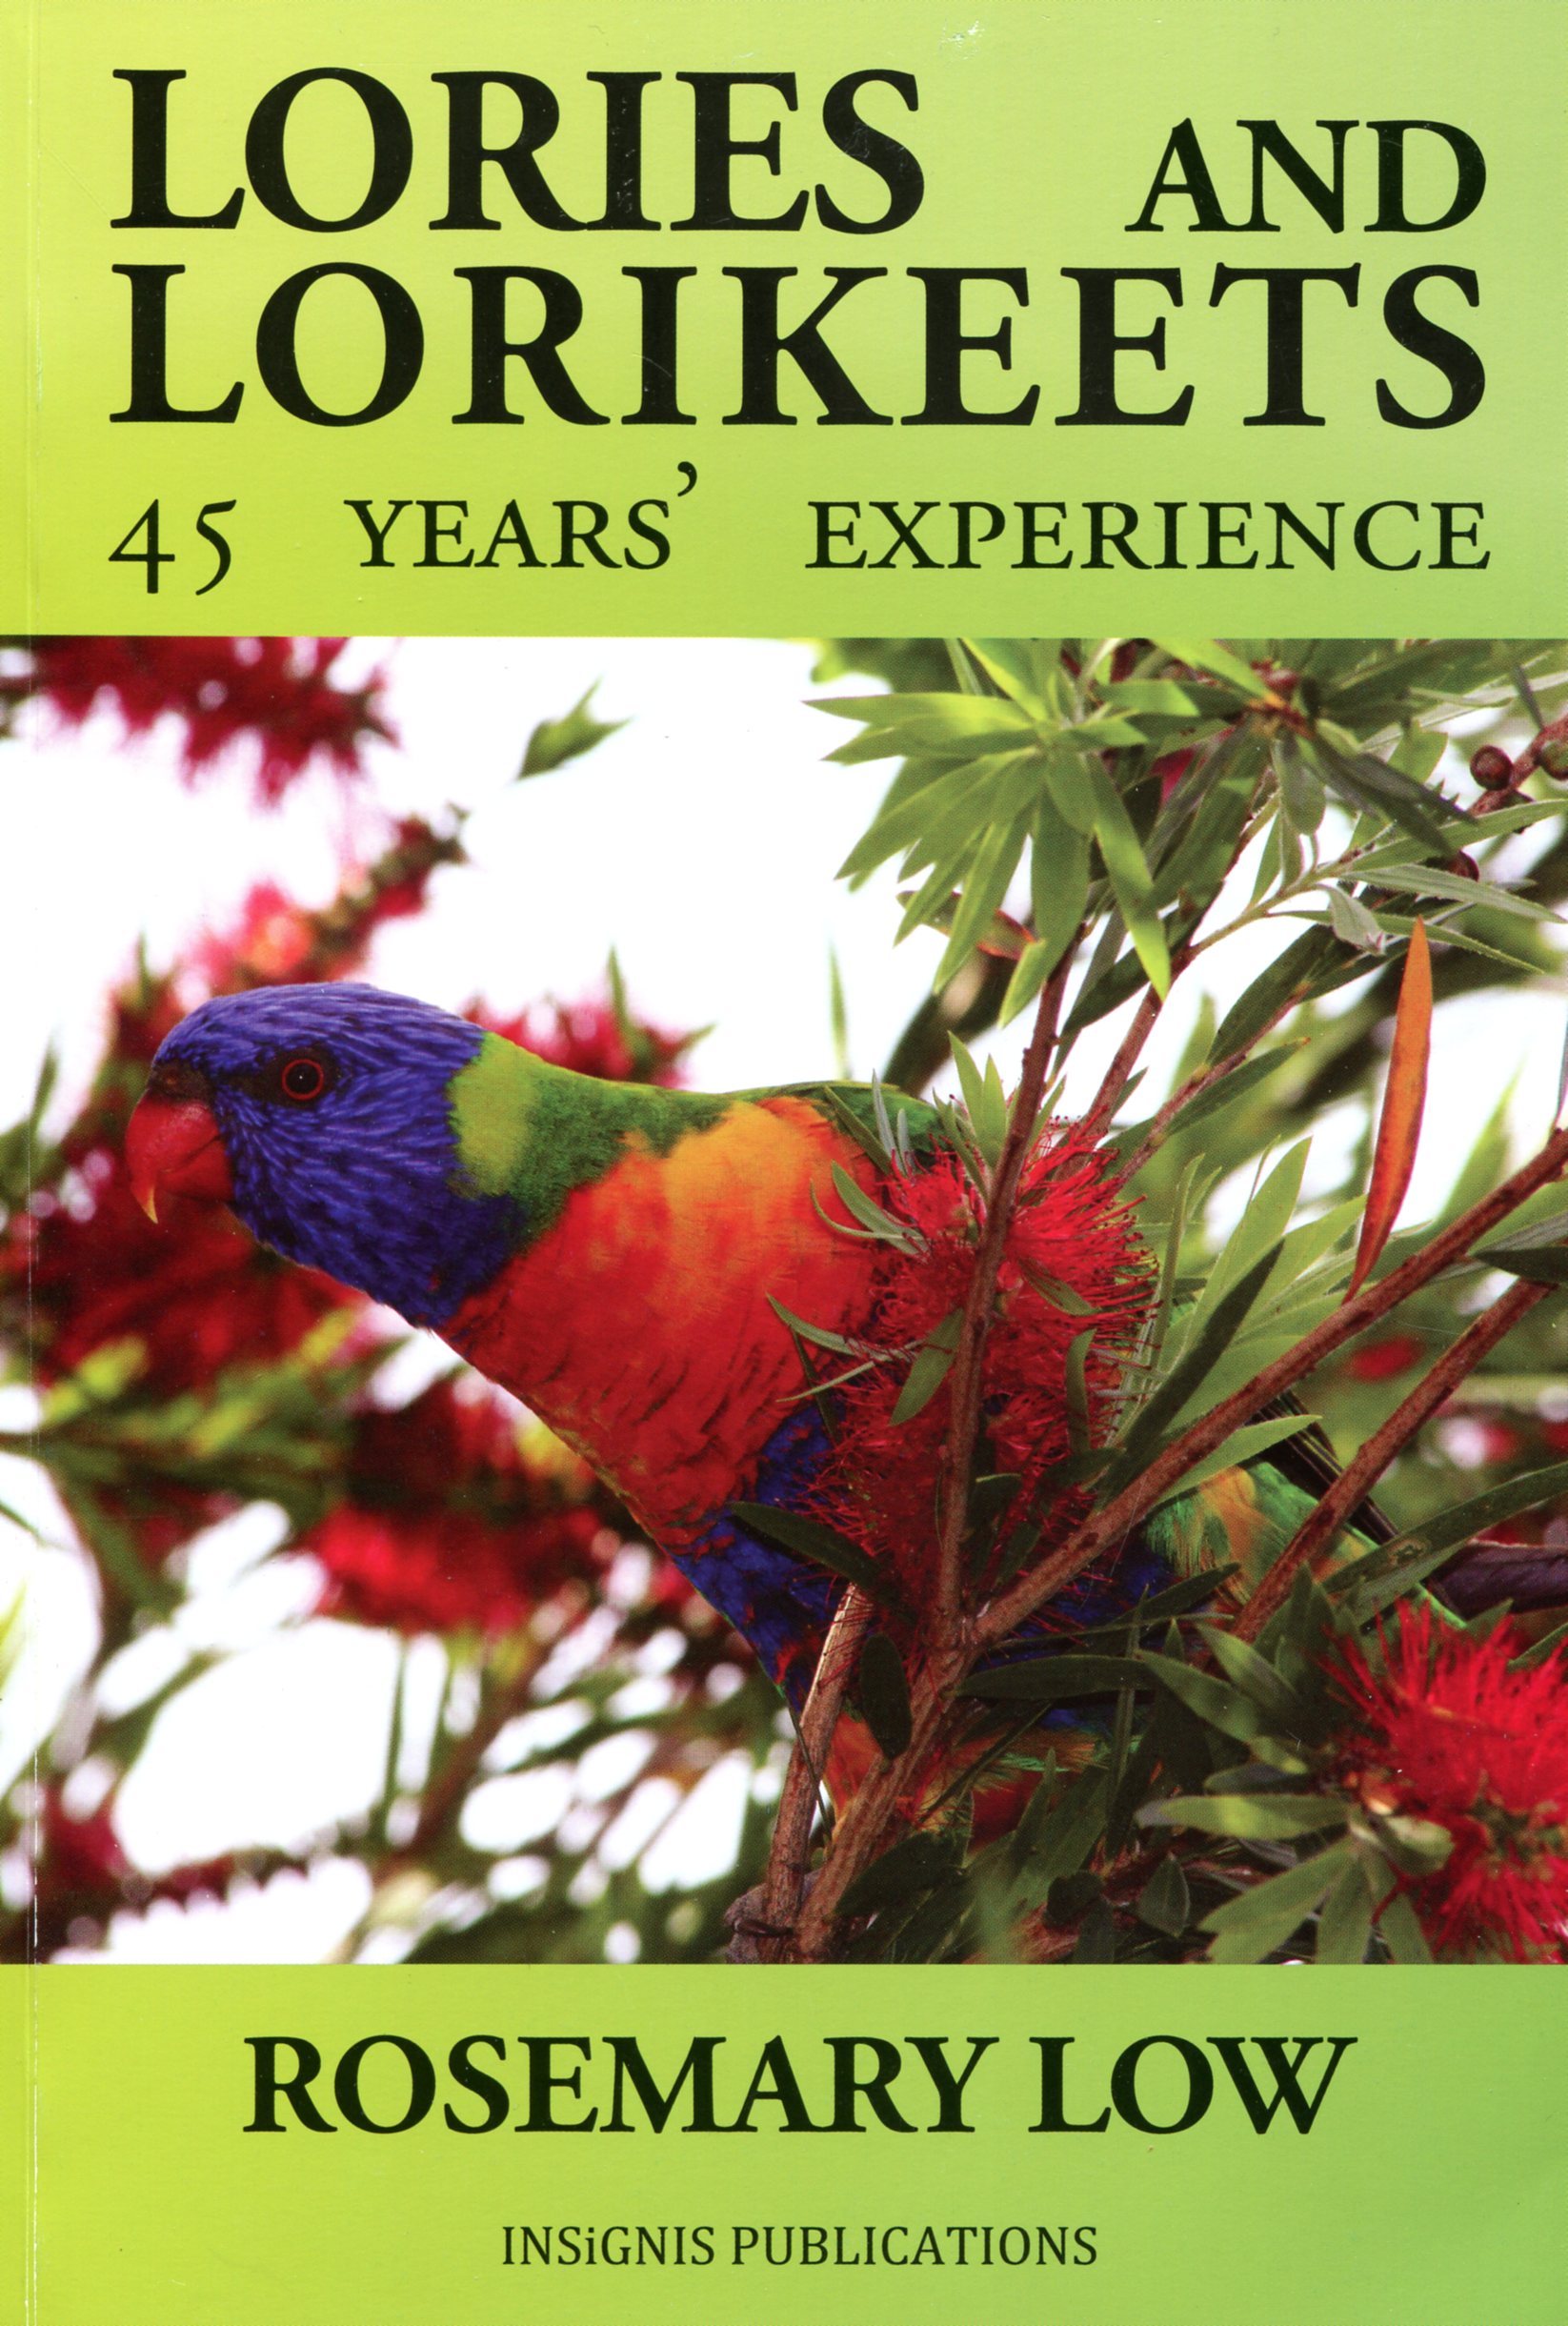 Lories and Lorikeets – 45 years of experience